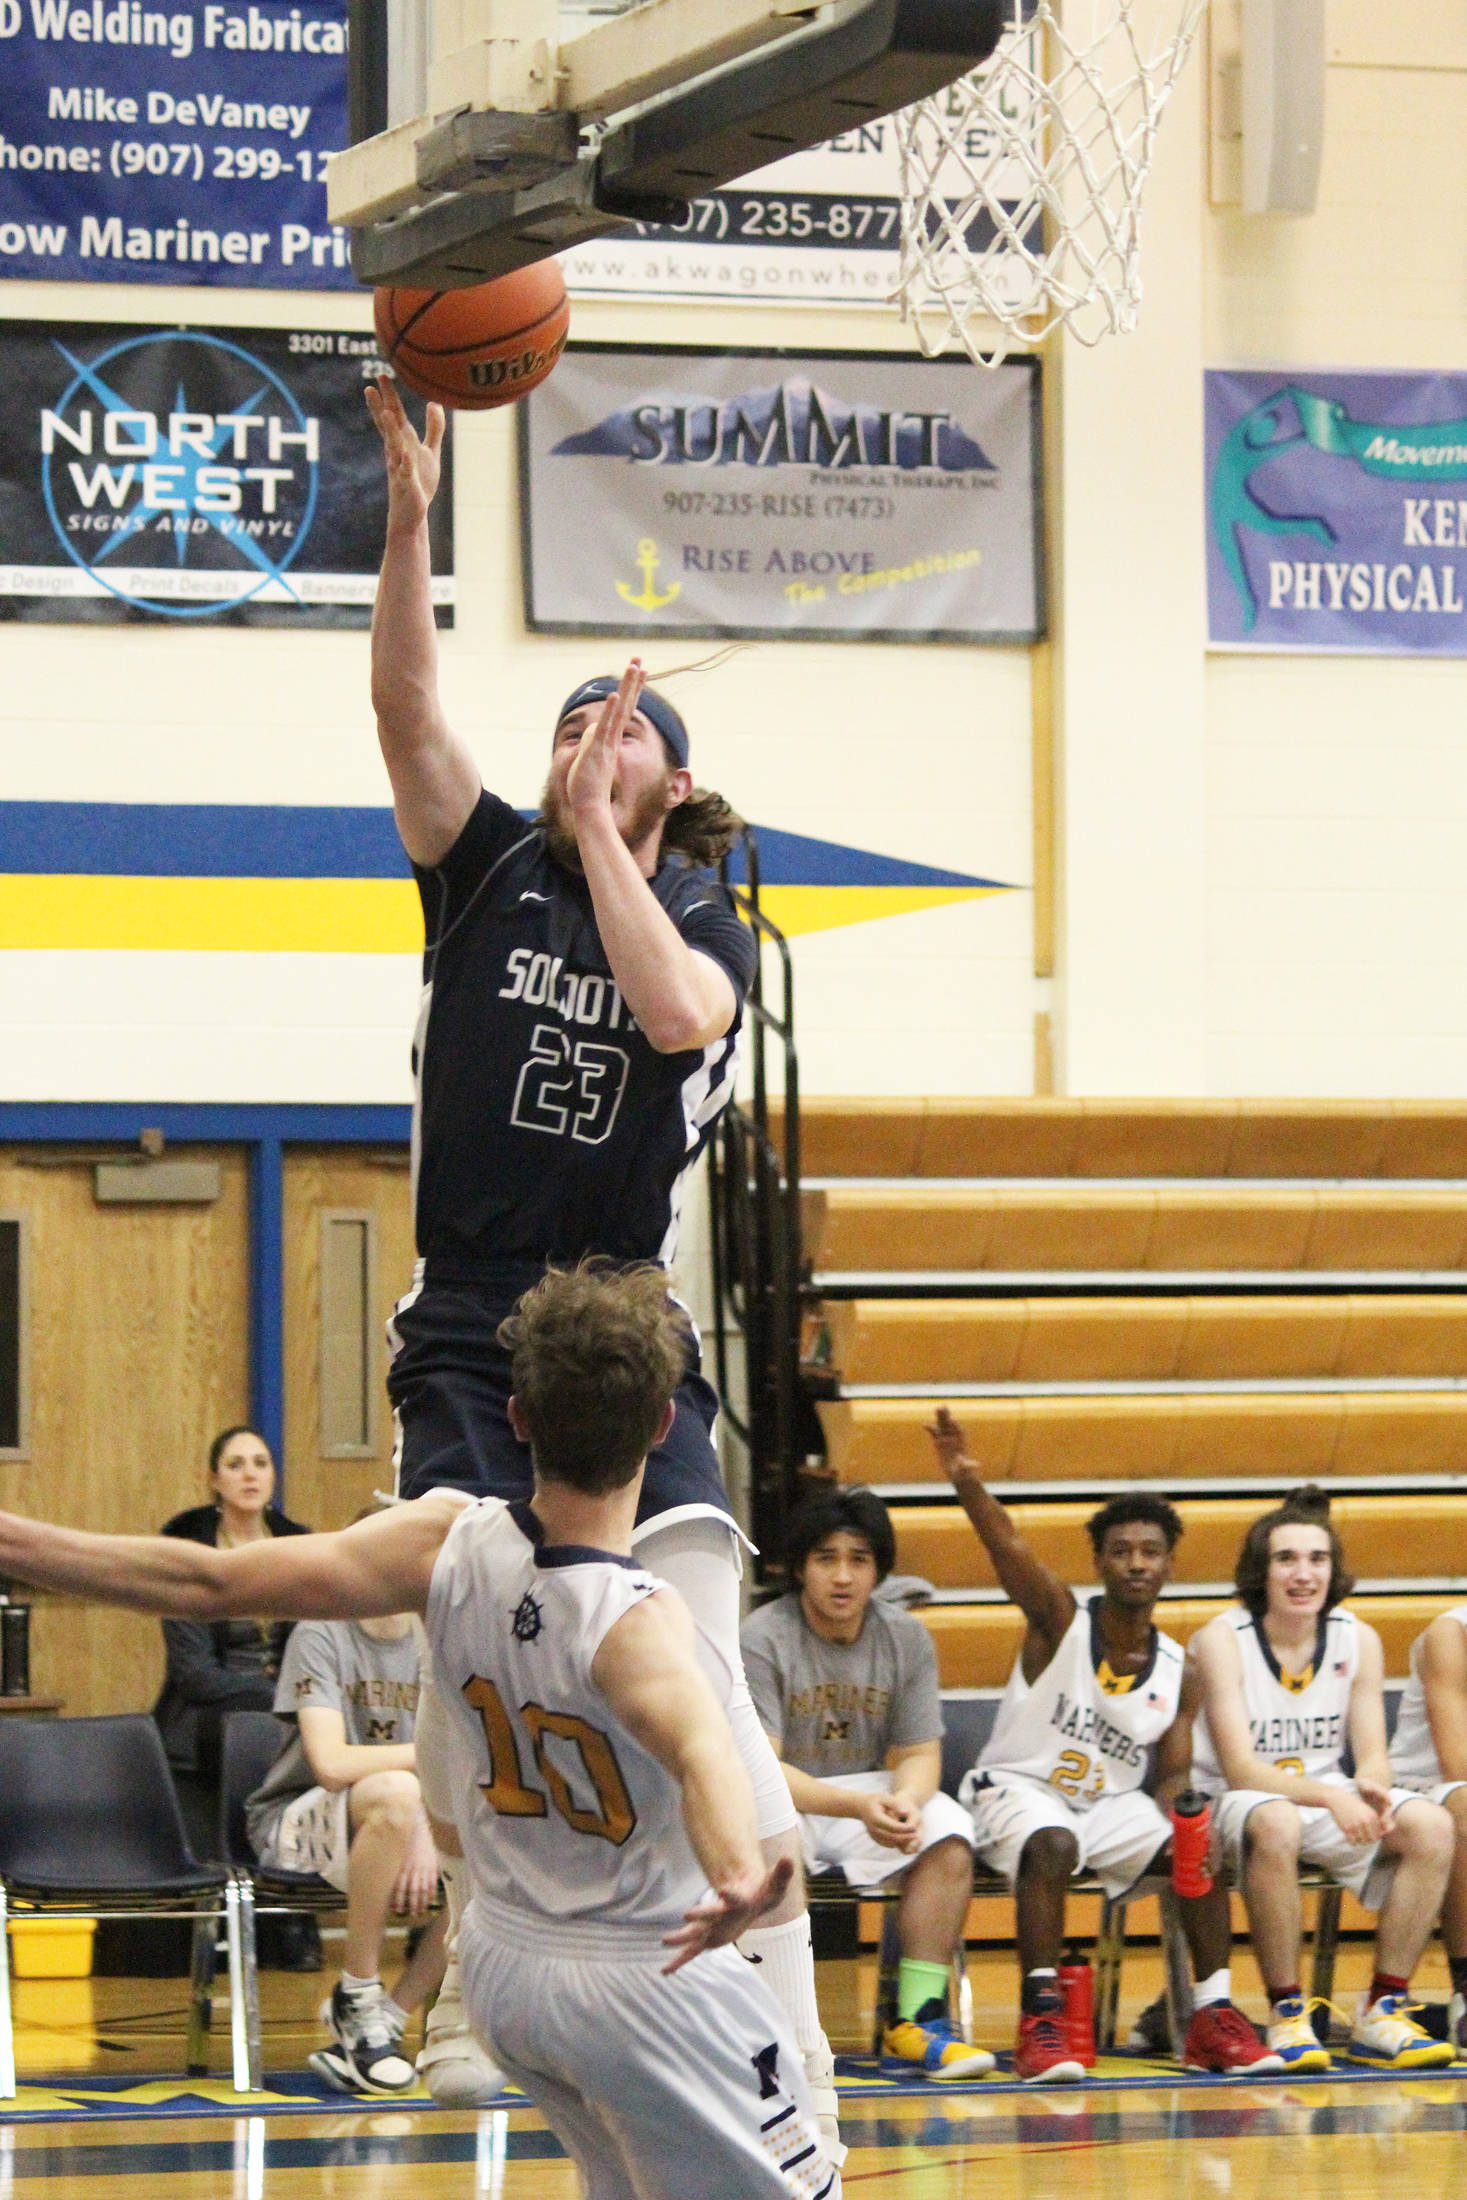 Soldotna High School’s David Michael bolls over Homer’s Seth Adkins while taking a shot during a Tuesday, Jan. 15, 2019 game in Homer, Alaska. (Photo by Megan Pacer/Homer News)